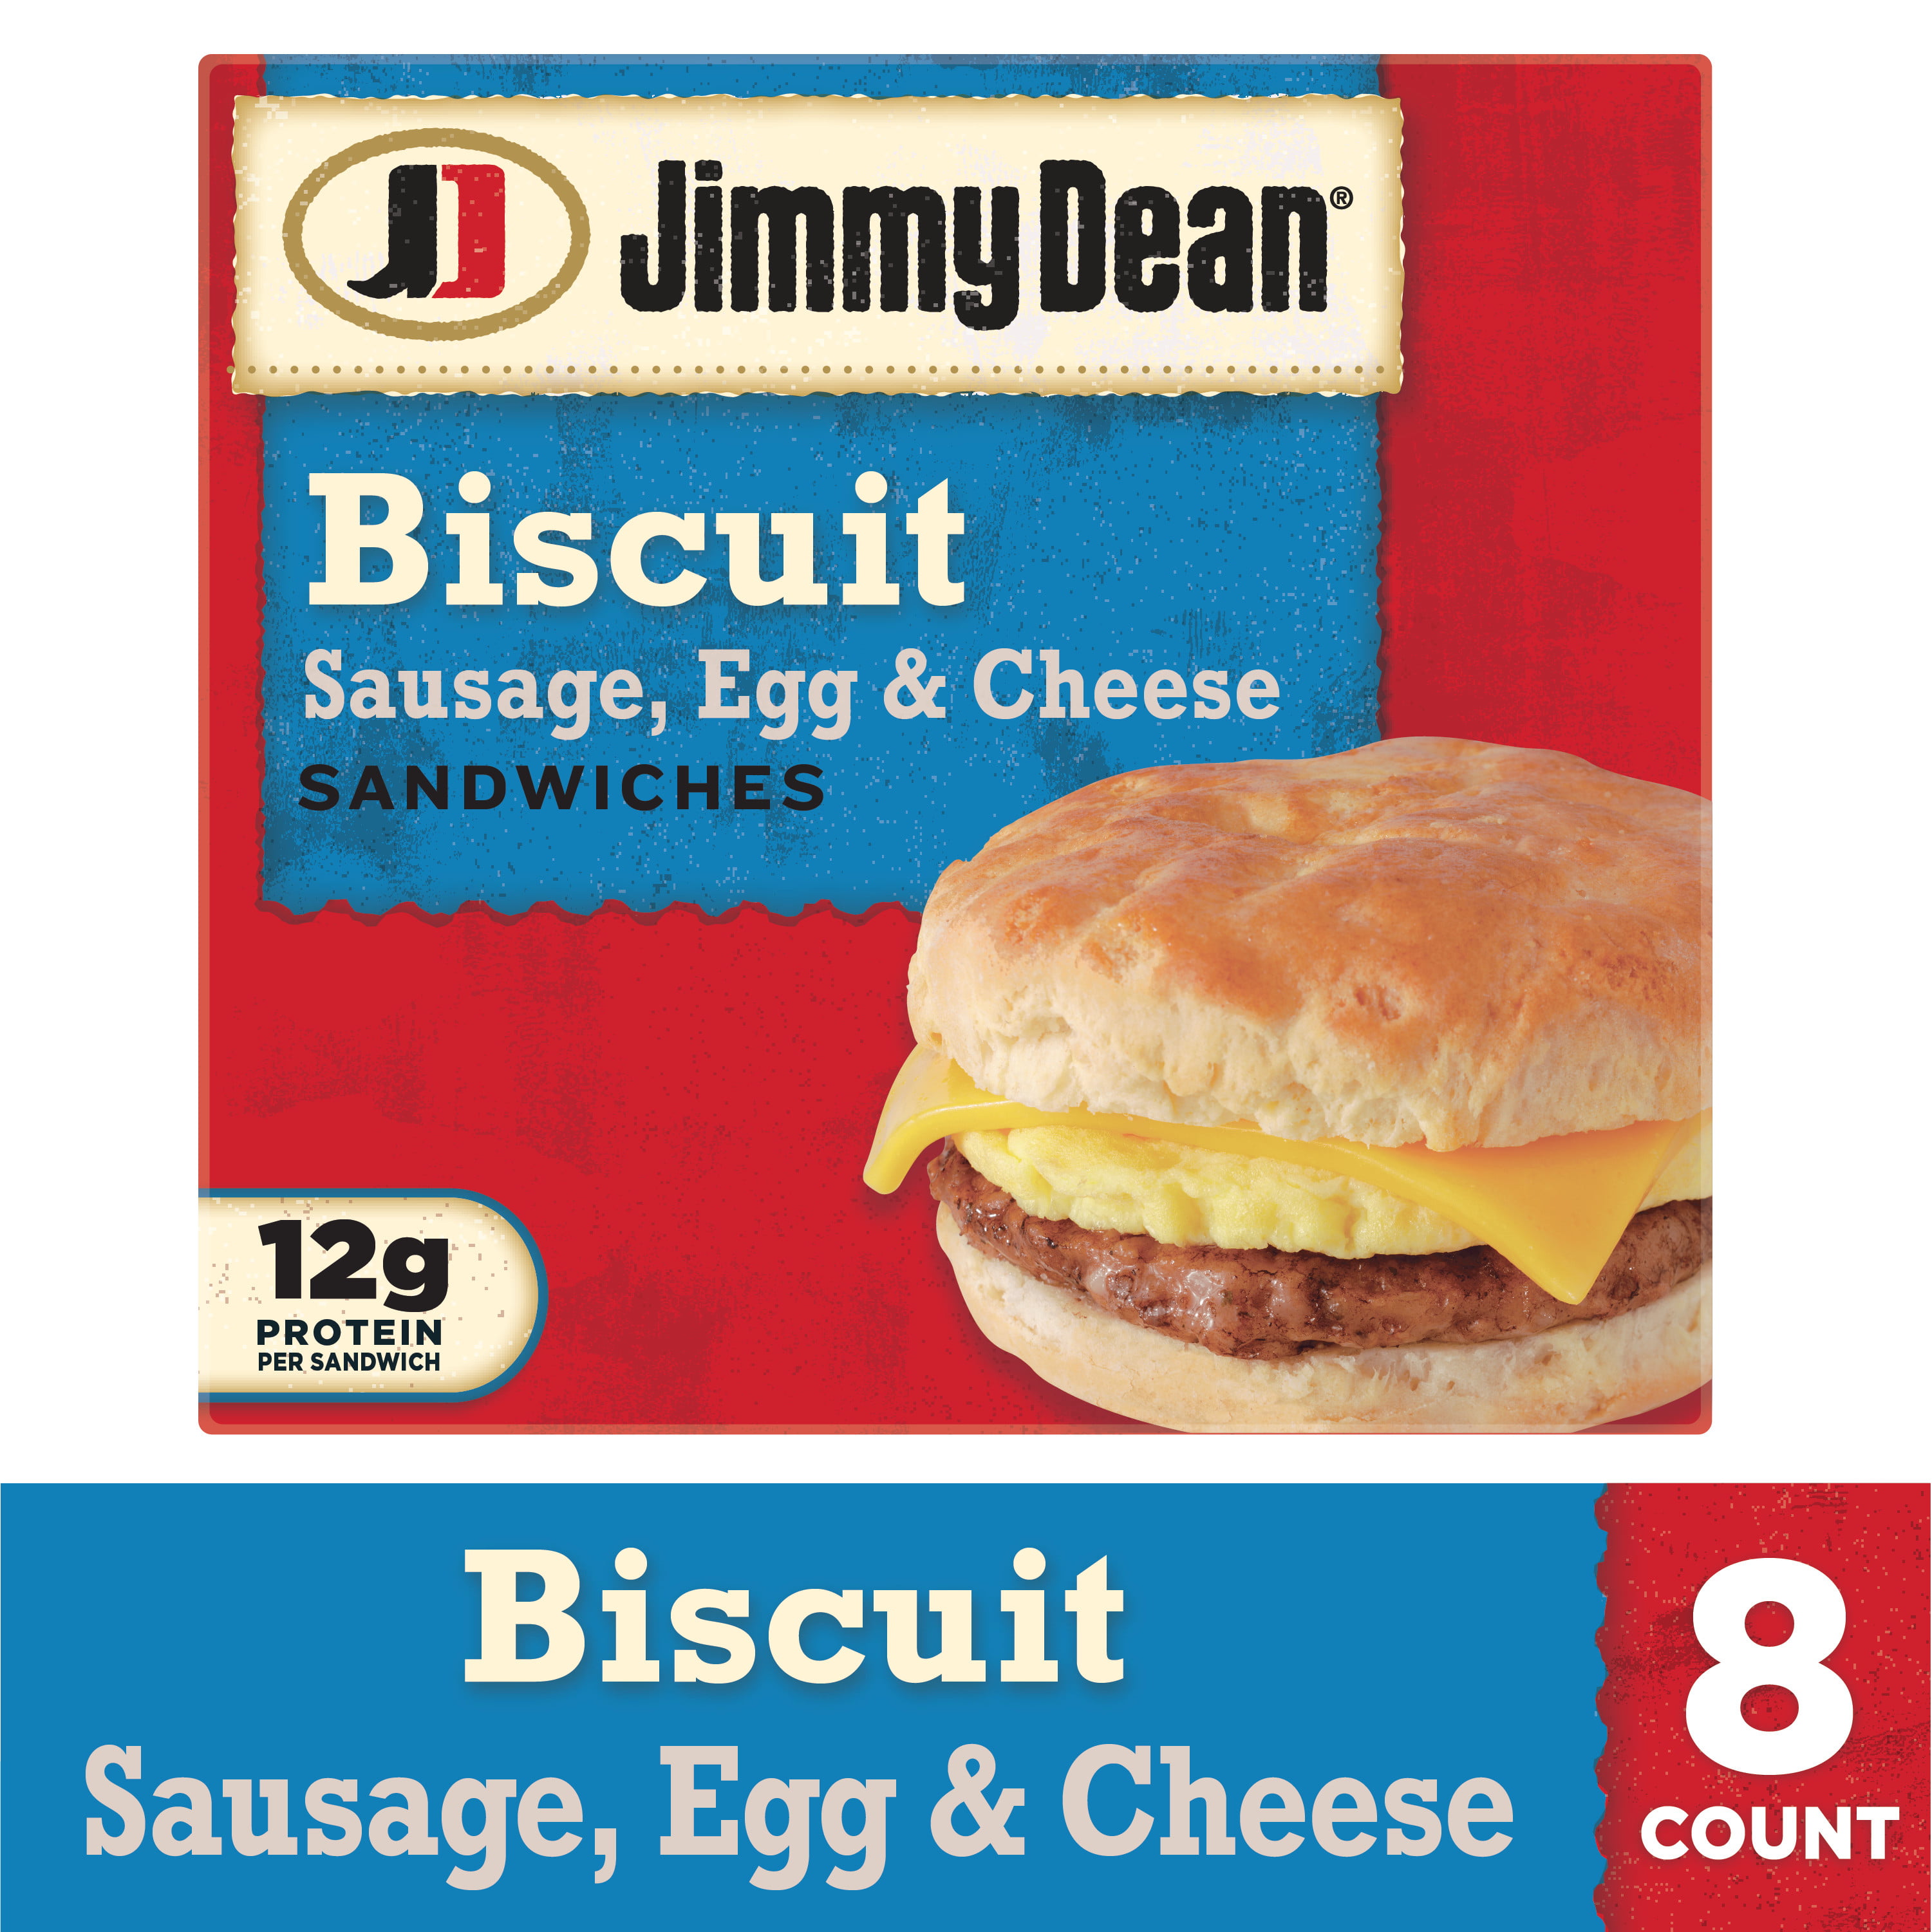 Jimmy Dean Sausage, Egg & Cheese Biscuit Sandwiches.